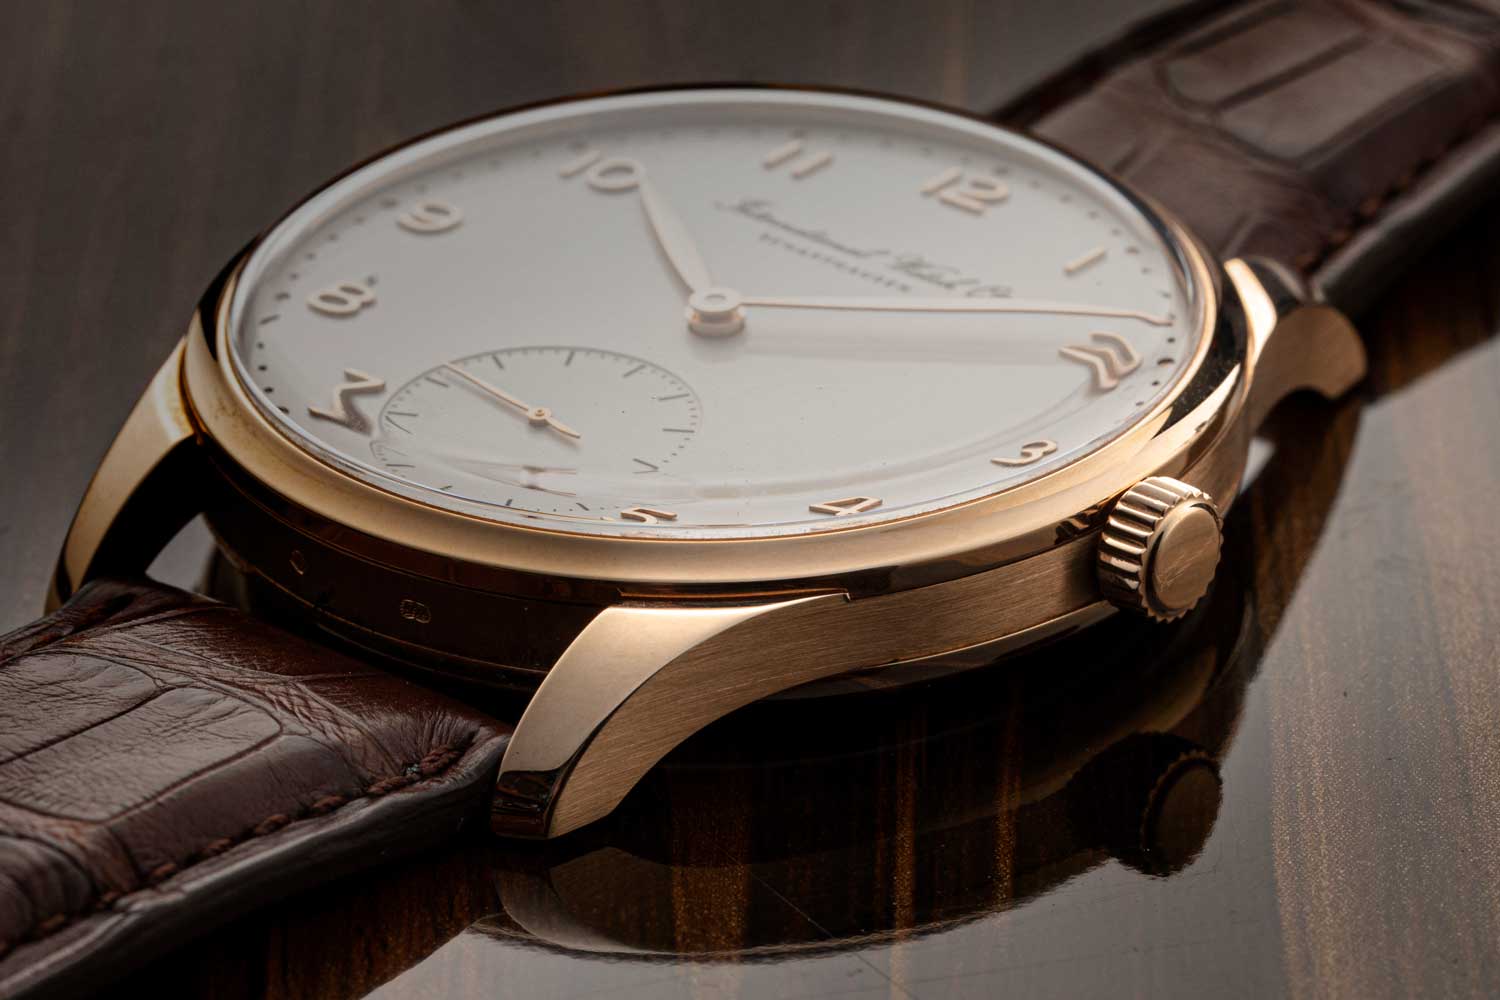 The IWC Portugieser Revolution 10th Anniversary Limited Edition used the new old stock cases for the 5441 in rose gold